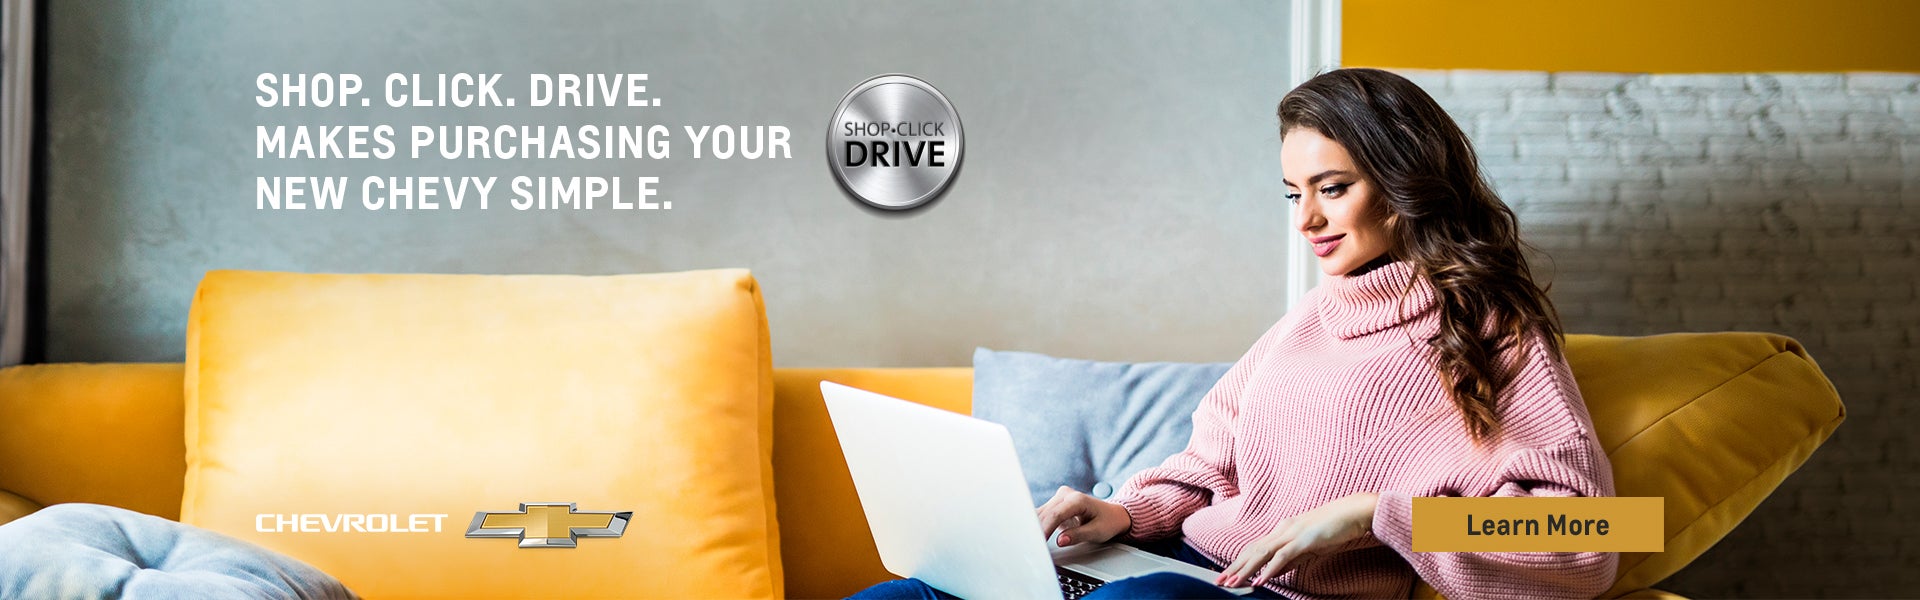 Shop. Click. Drive. Makes purchasing your new Chevy simple.